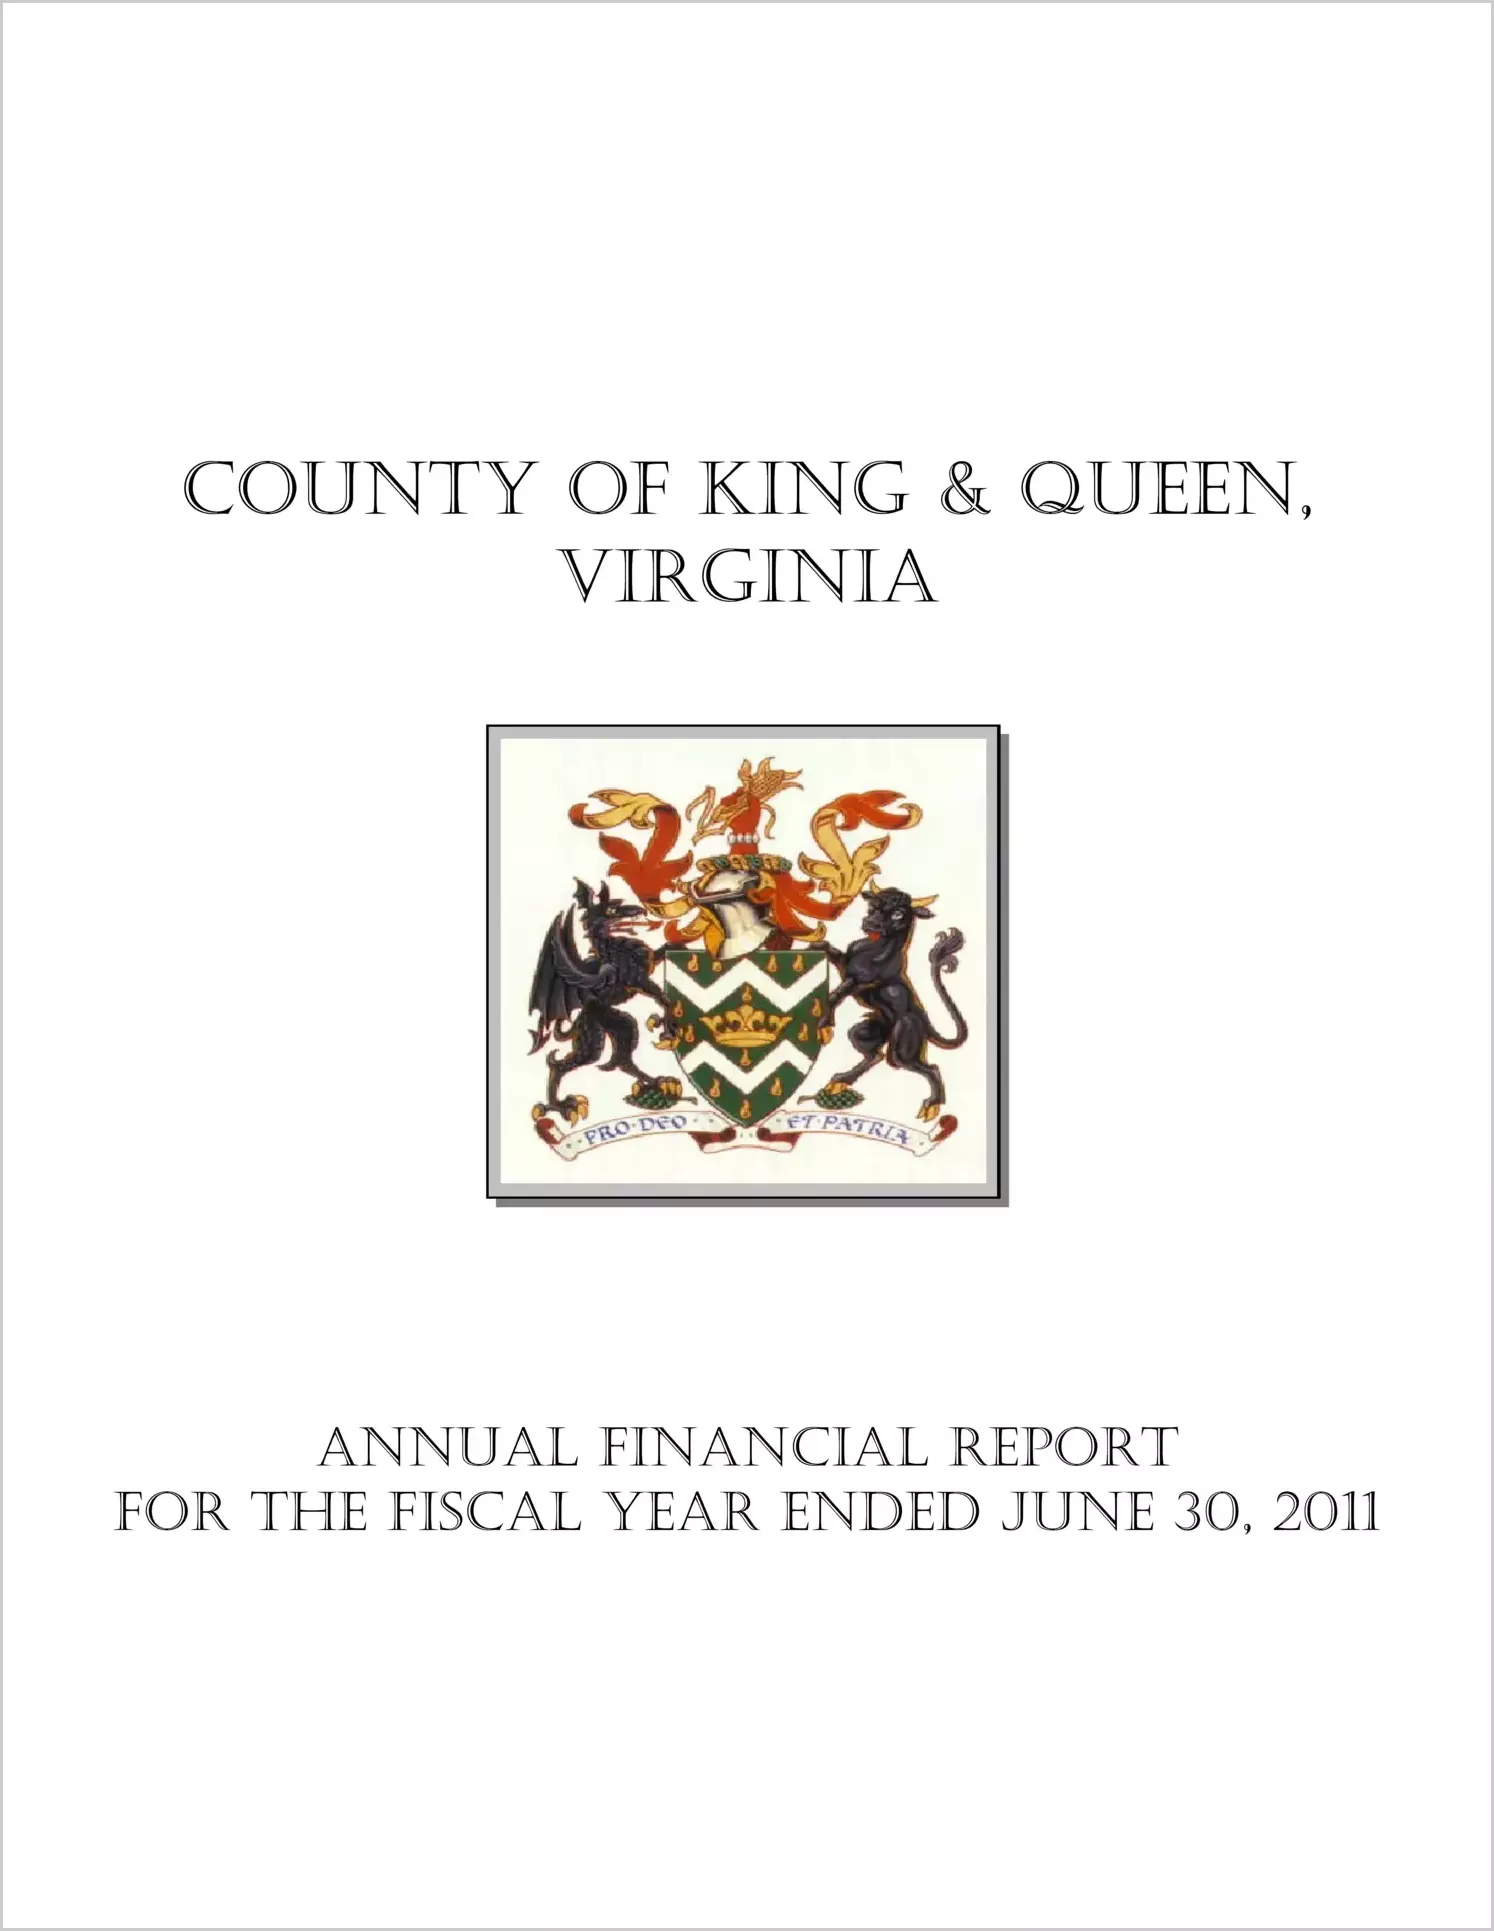 2011 Annual Financial Report for County of King & Queen